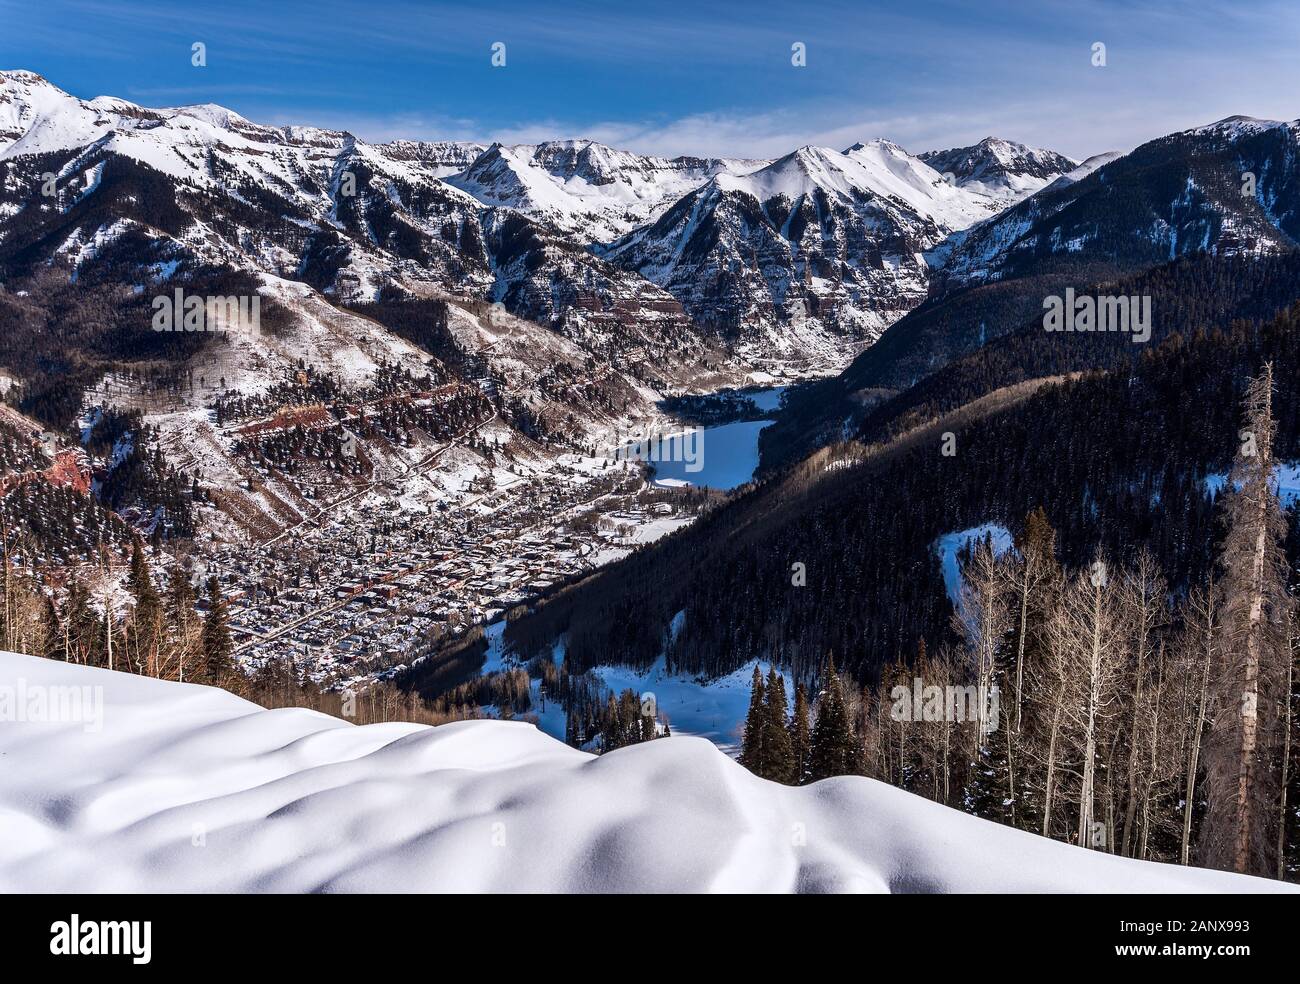 Telluride, Colorado and the San Juan Mountains with winter snow Stock Photo